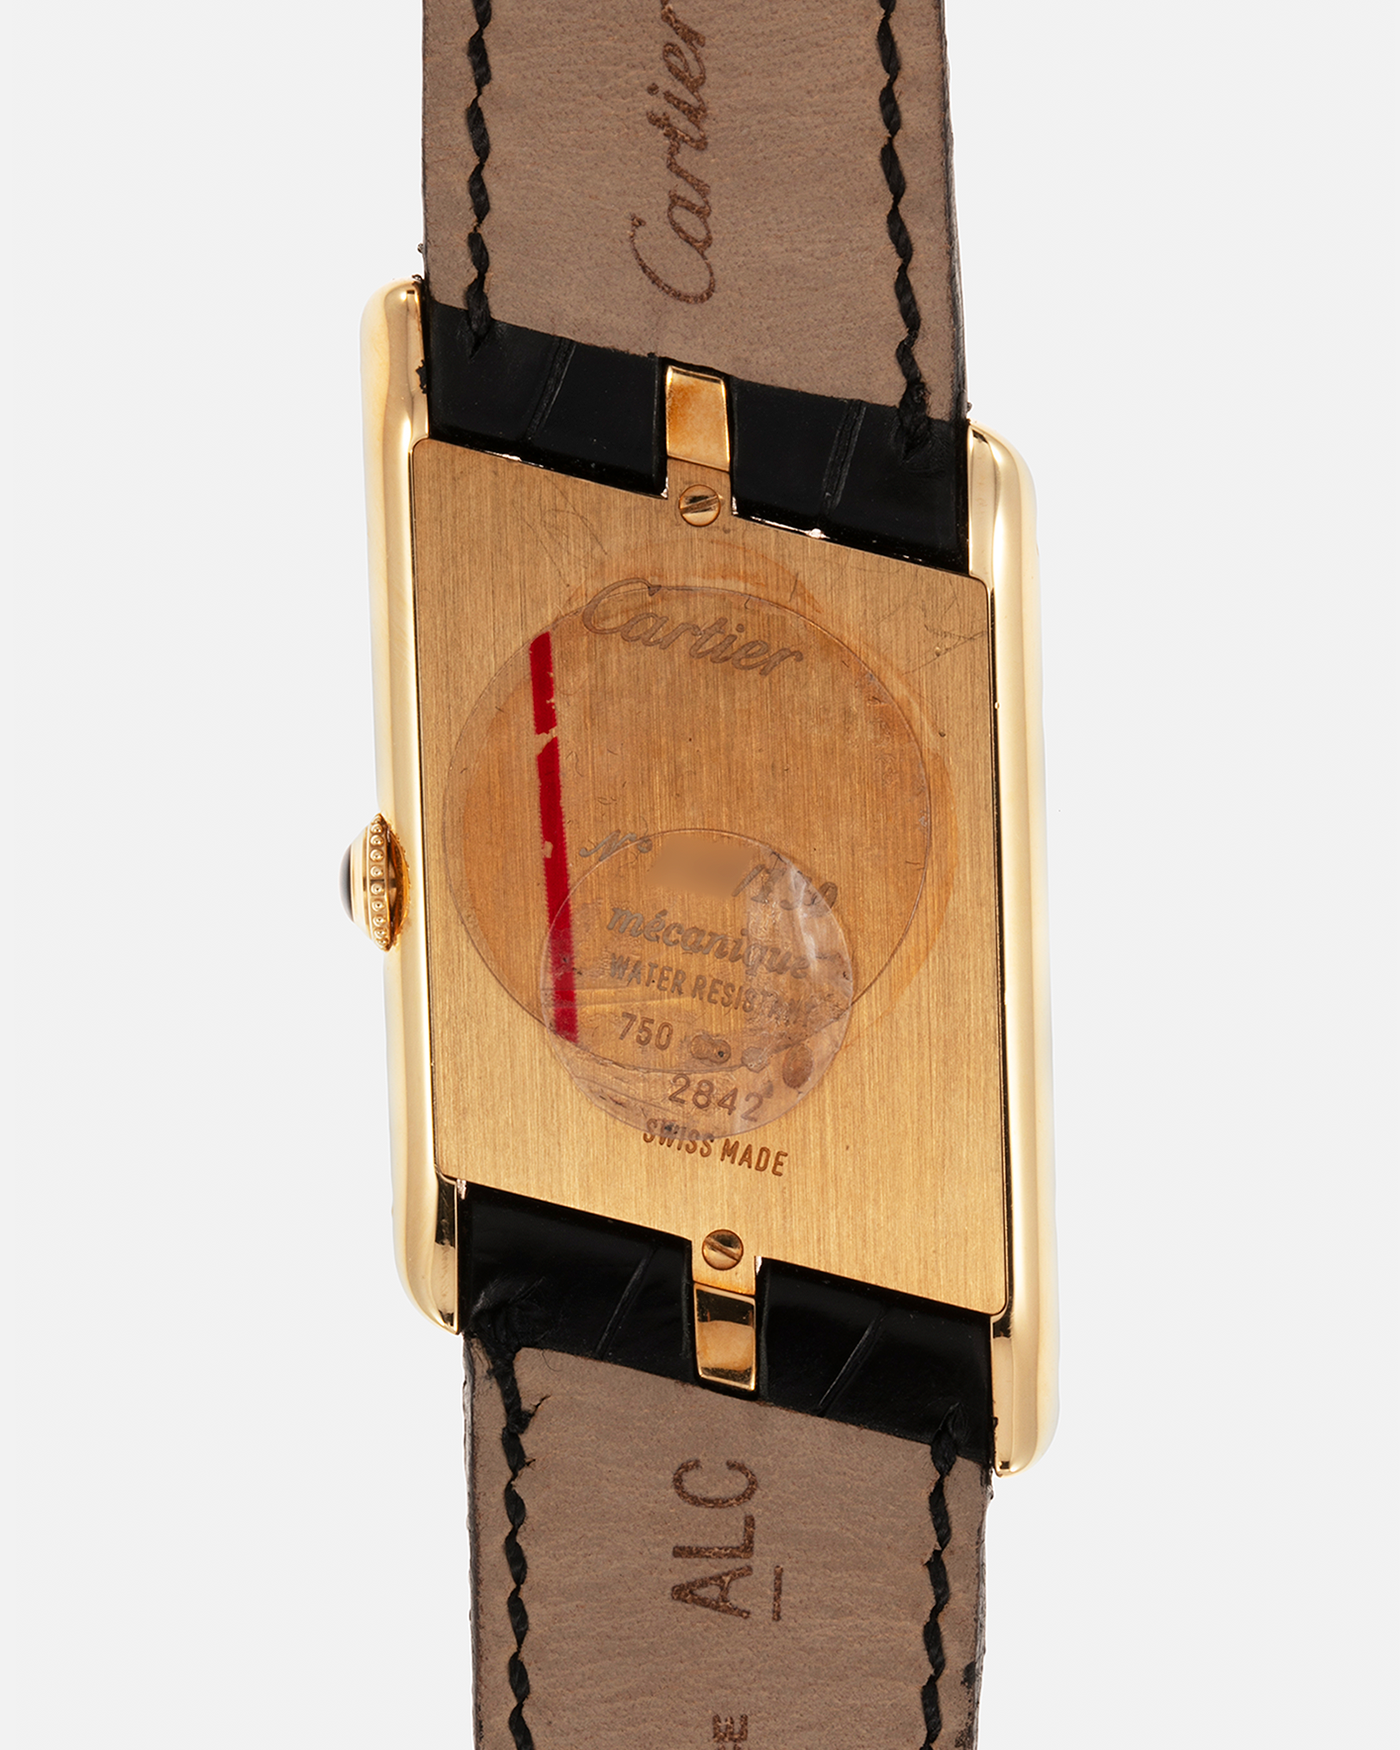 Brand: Cartier Year: 2006 Model: Tank Asymétrique CPCP, Limited Edition of 150 pieces Reference Number: 2842 Material: 18-carat Yellow Gold Movement: Cartier Cal. 9770 MC, Manual-Winding Case Diameter: 26.5mm x 41mm x 7.5mm Strap: Cartier Black Alligator Leather with Signed 18-carat Yellow Gold Deployant Clasp